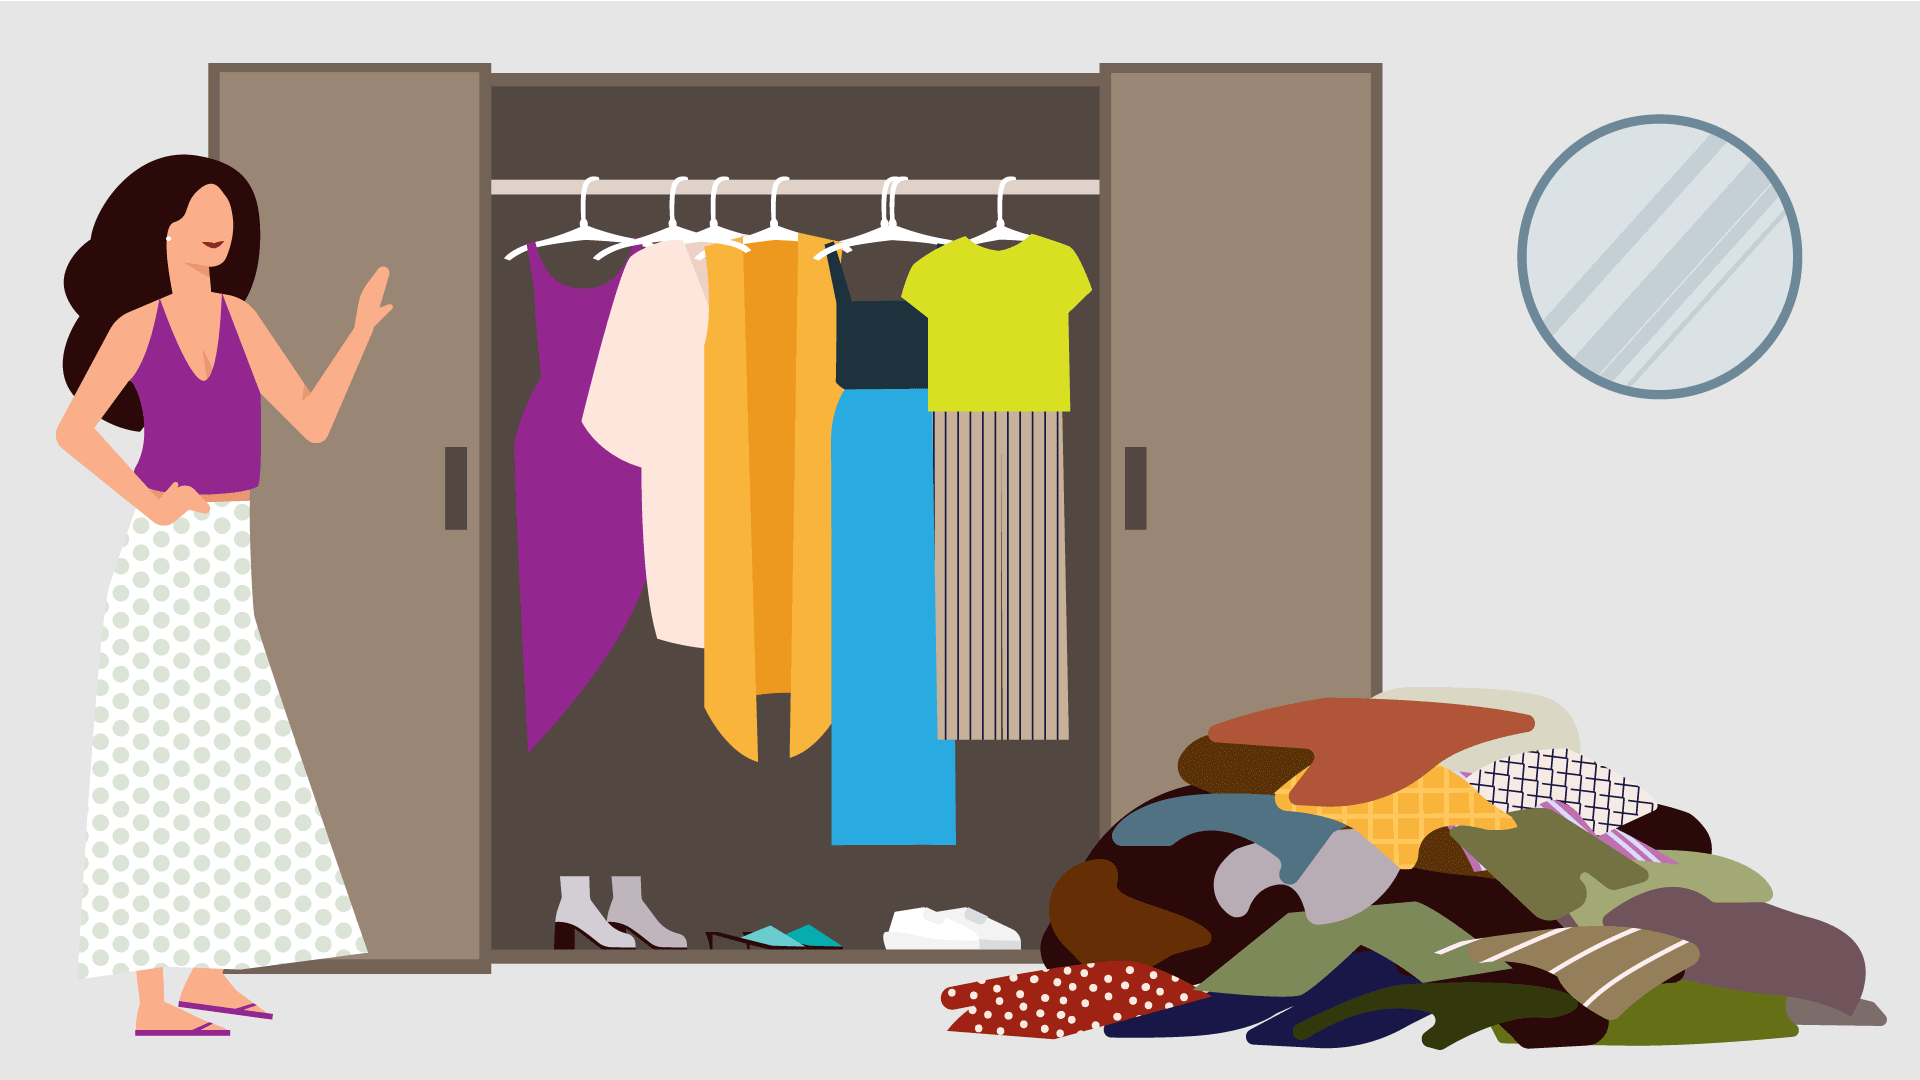 Animation of illustrated woman trying on different clothes, with a closet in the background and a pile of clothes on the right